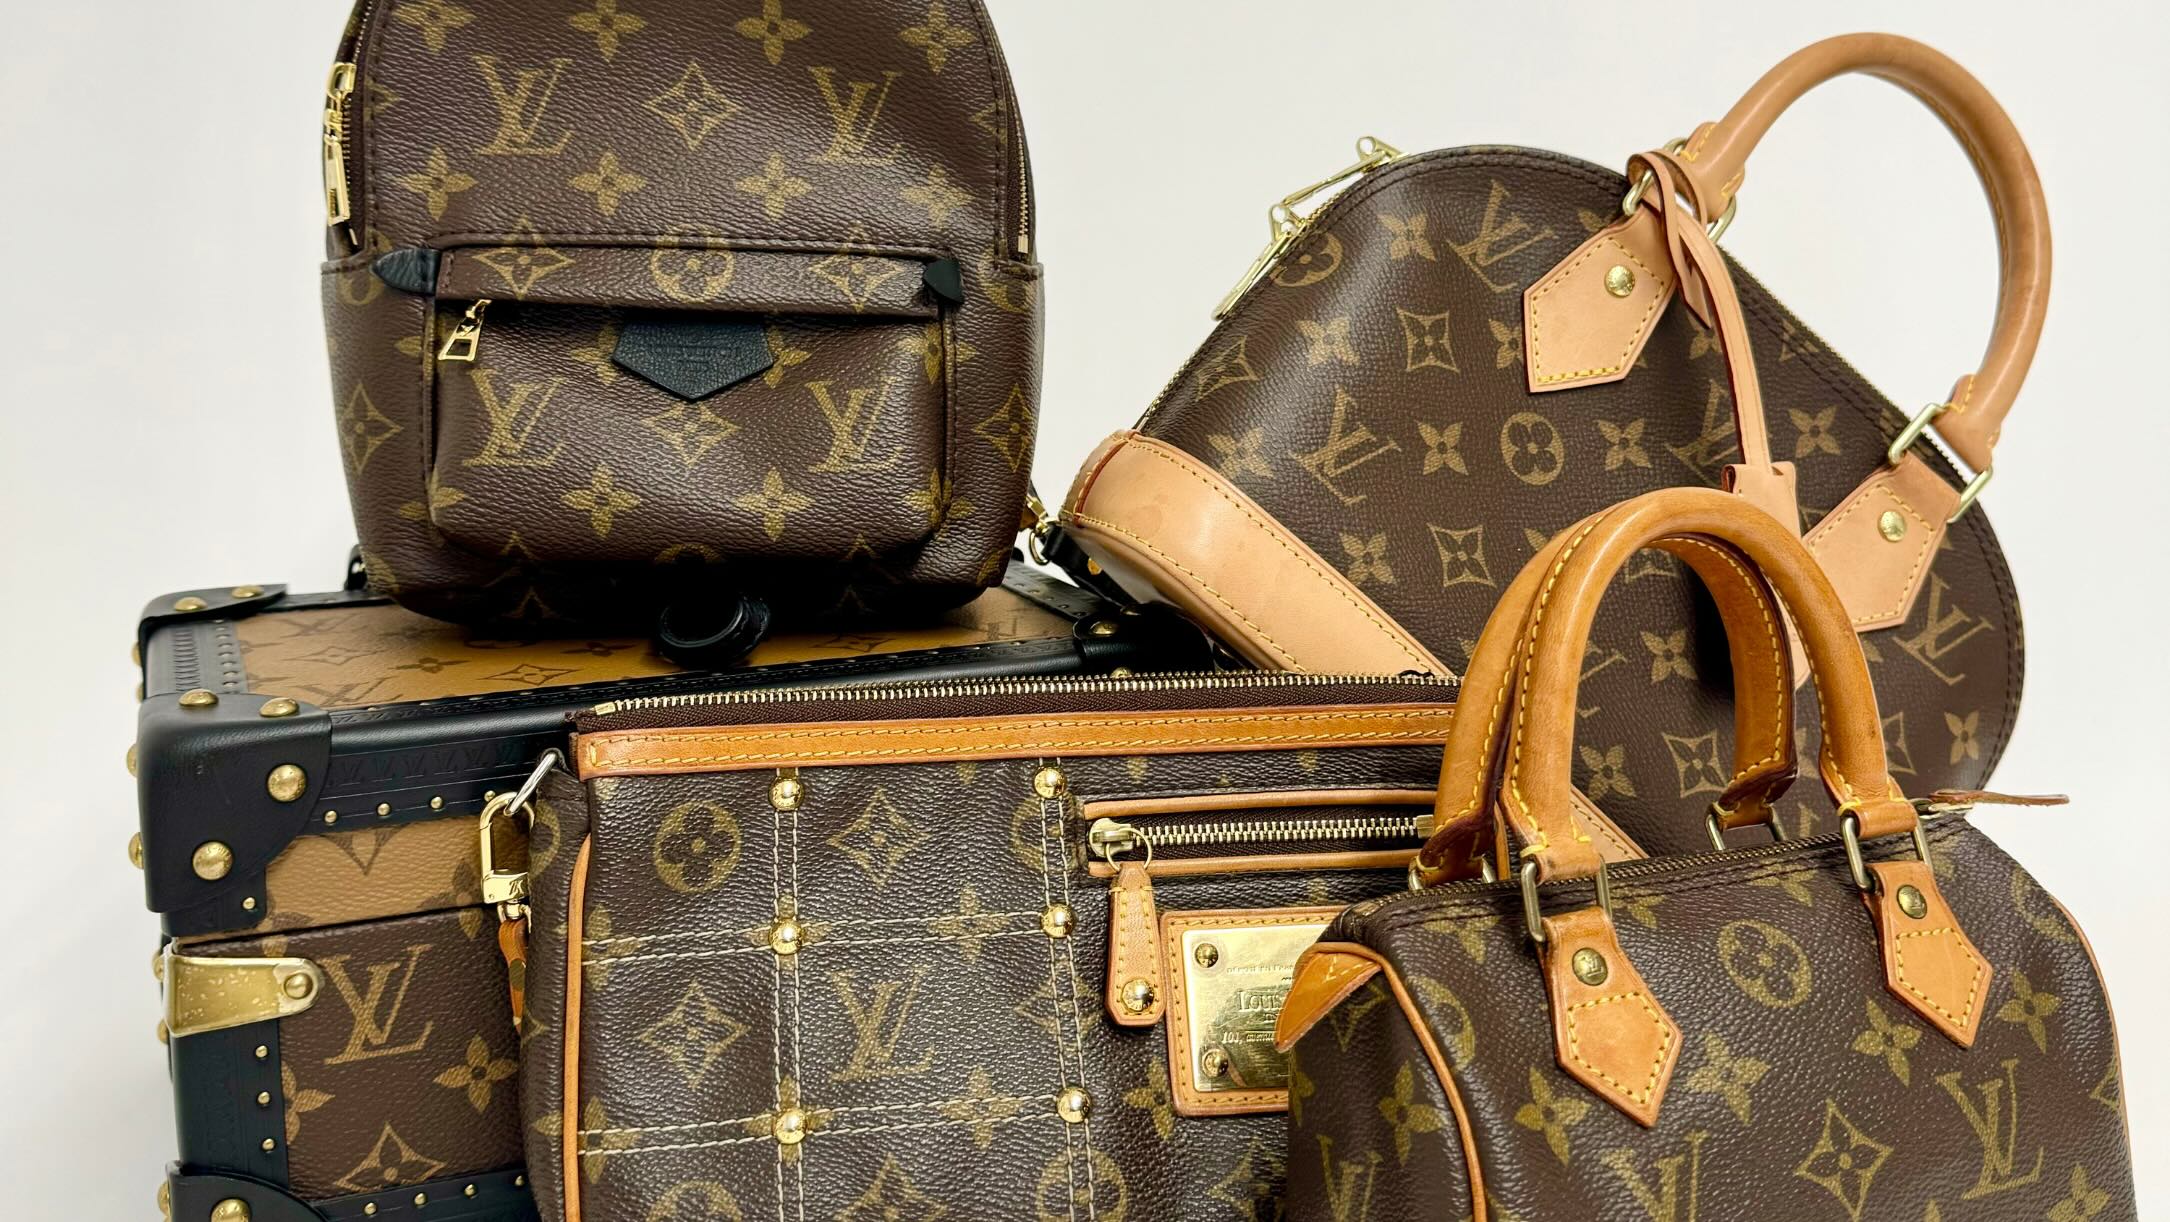 LV bags under $1000